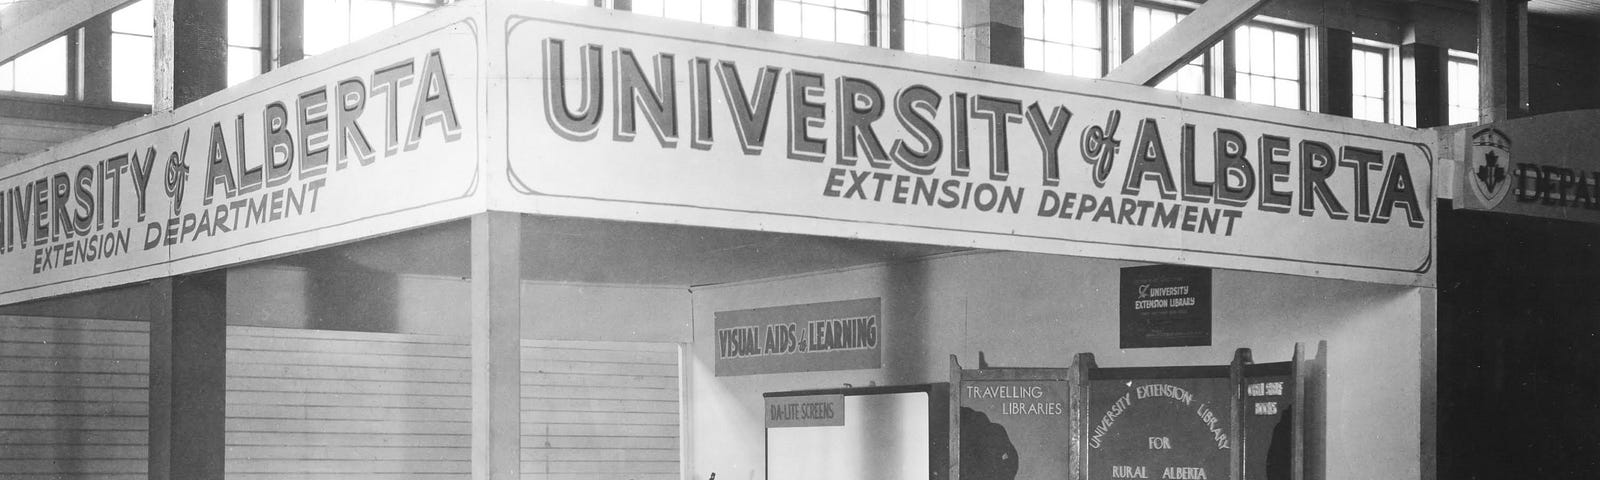 A historical look at the then, Department of Extension.